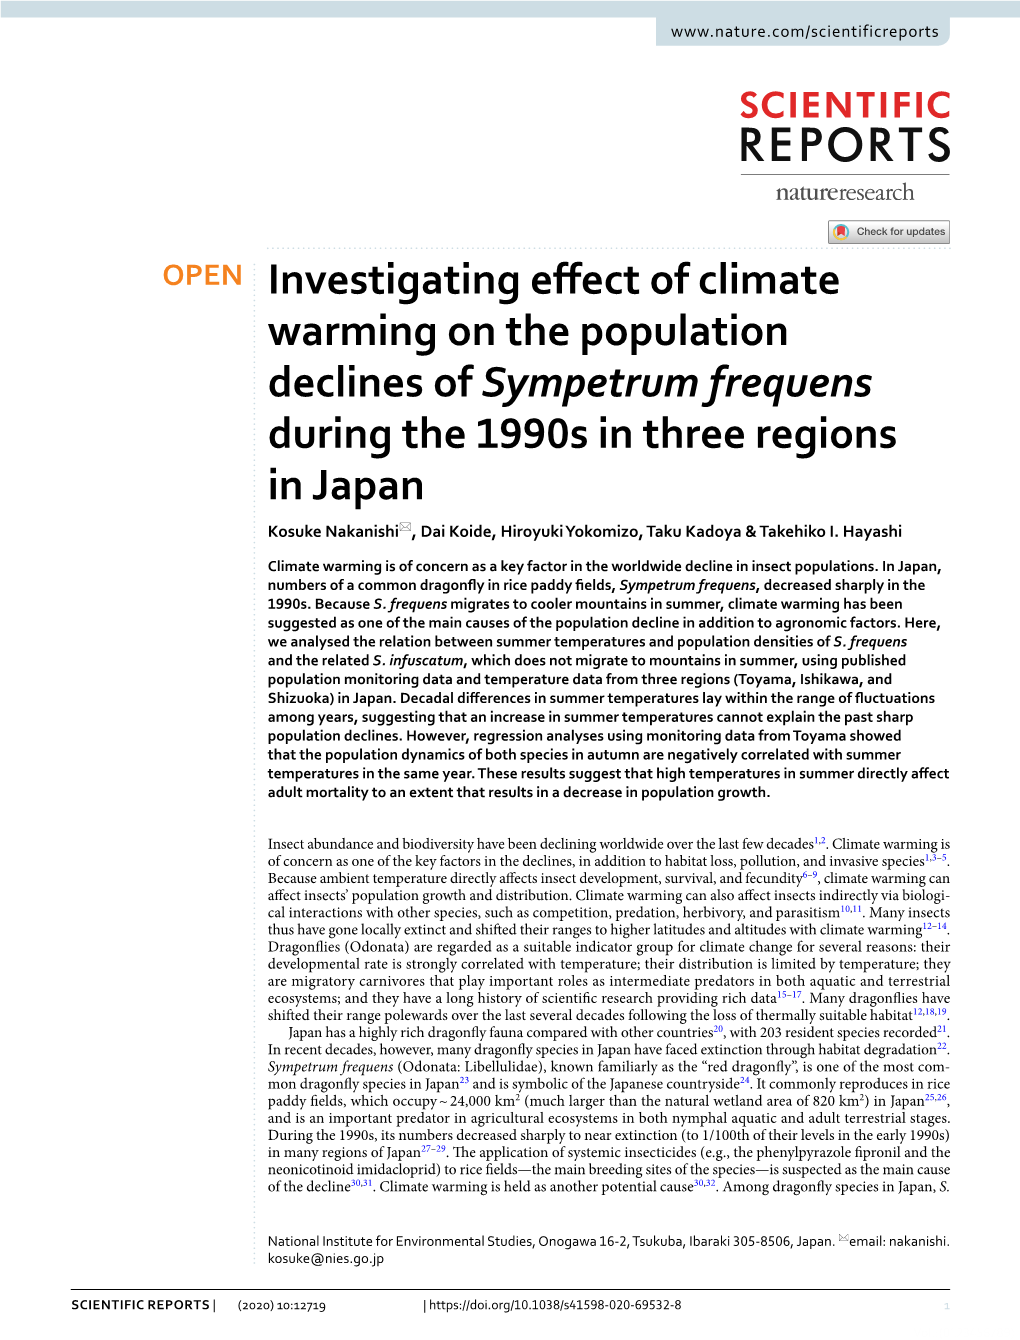 Investigating Effect of Climate Warming on the Population Declines Of